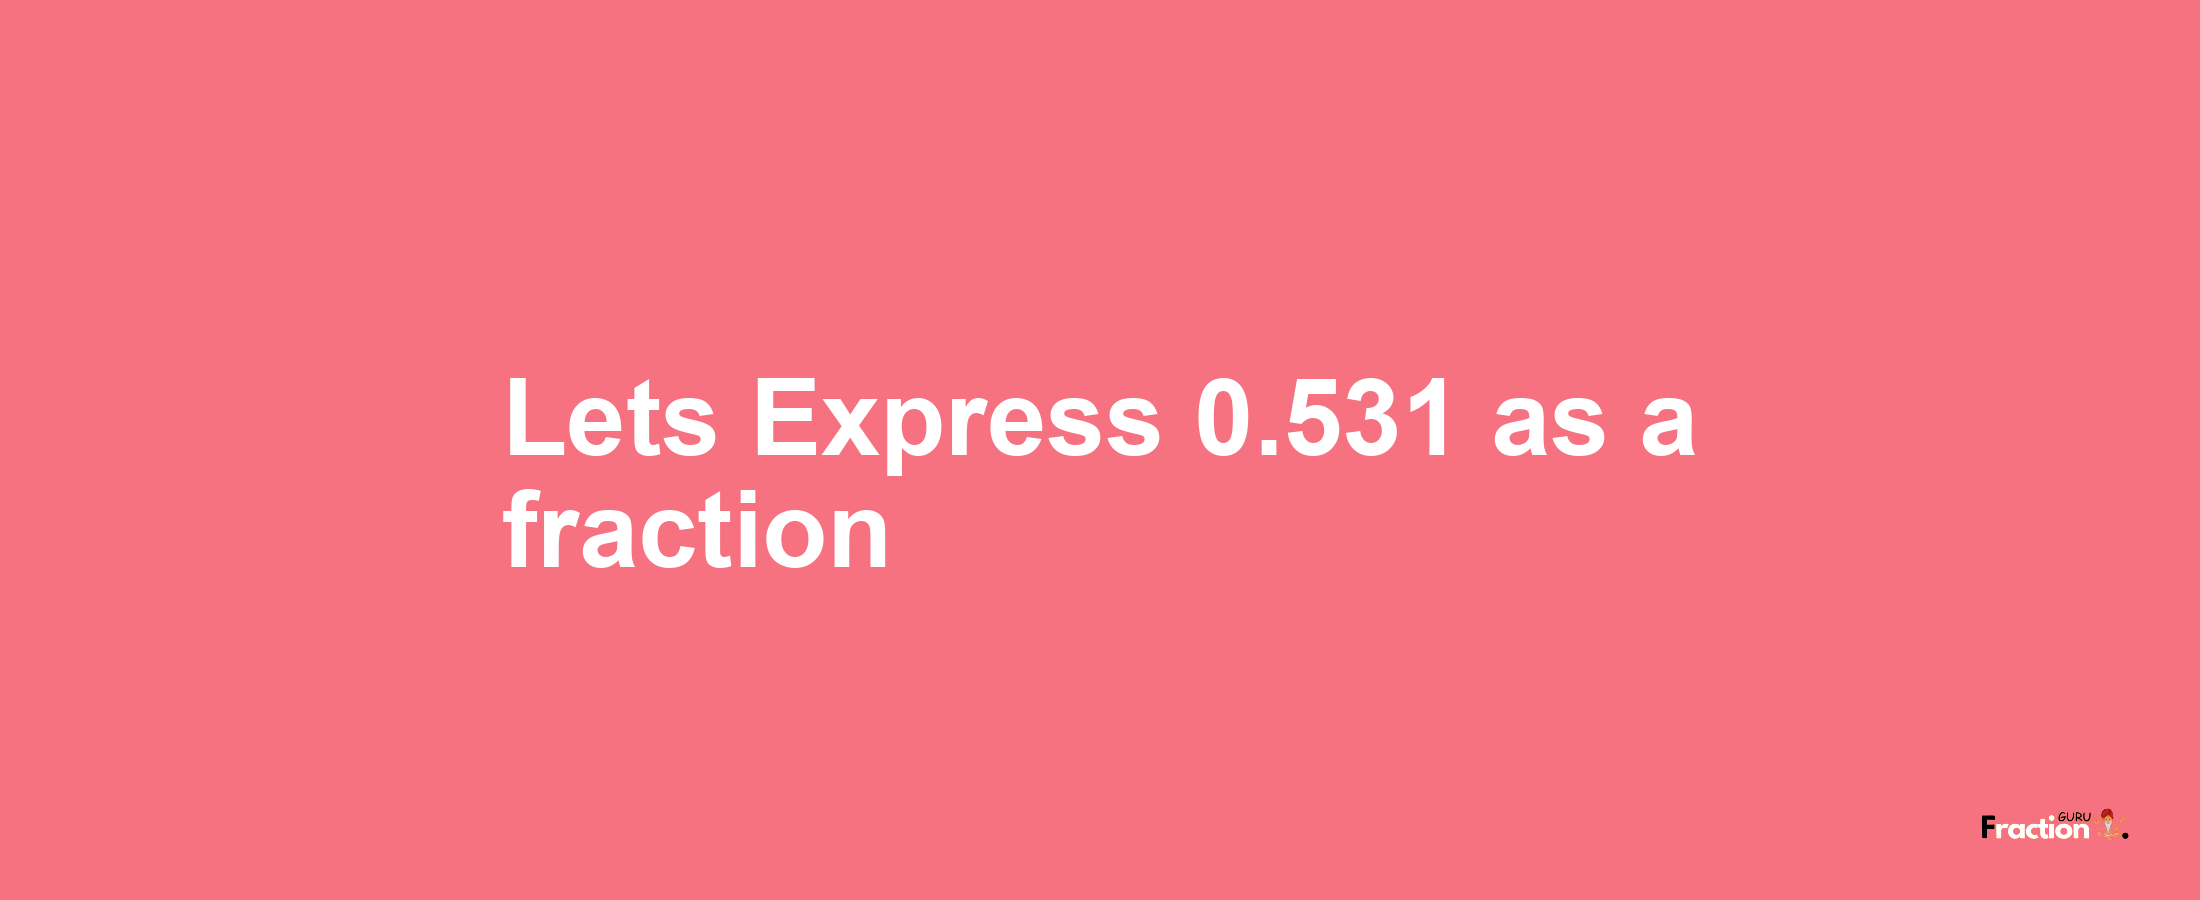 Lets Express 0.531 as afraction